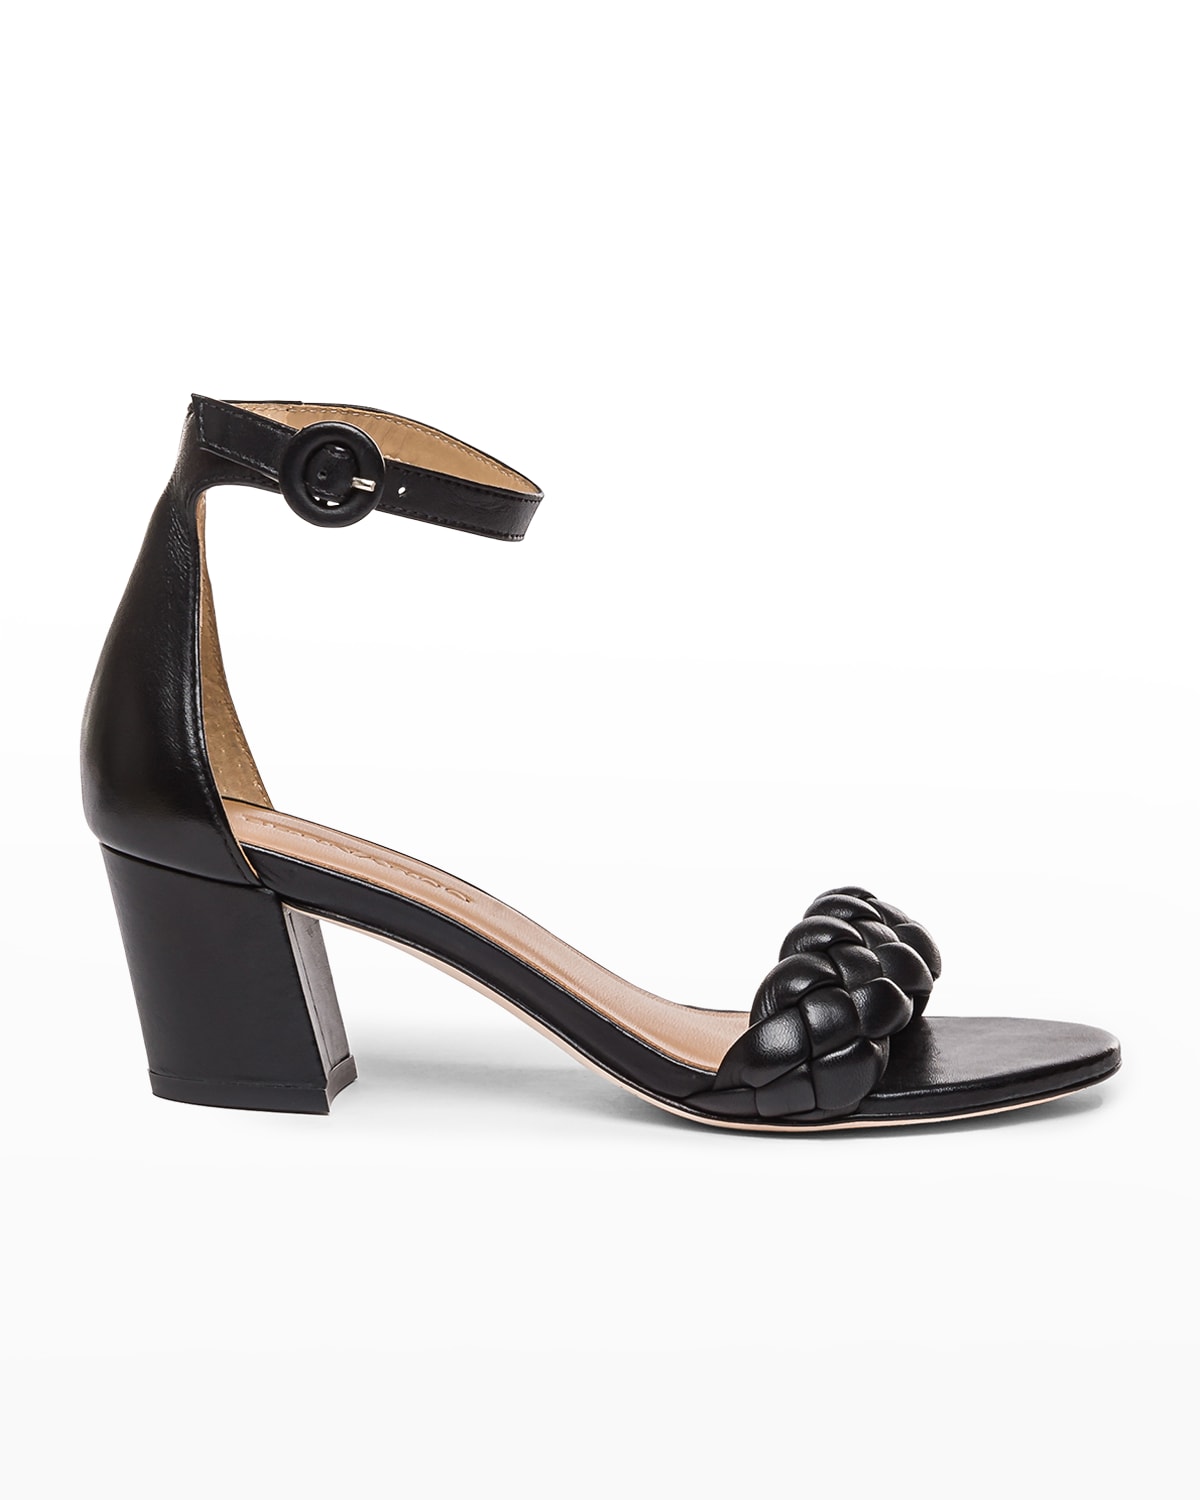 Alexander McQueen Studded Leather Ankle Strap Sandals | Neiman Marcus